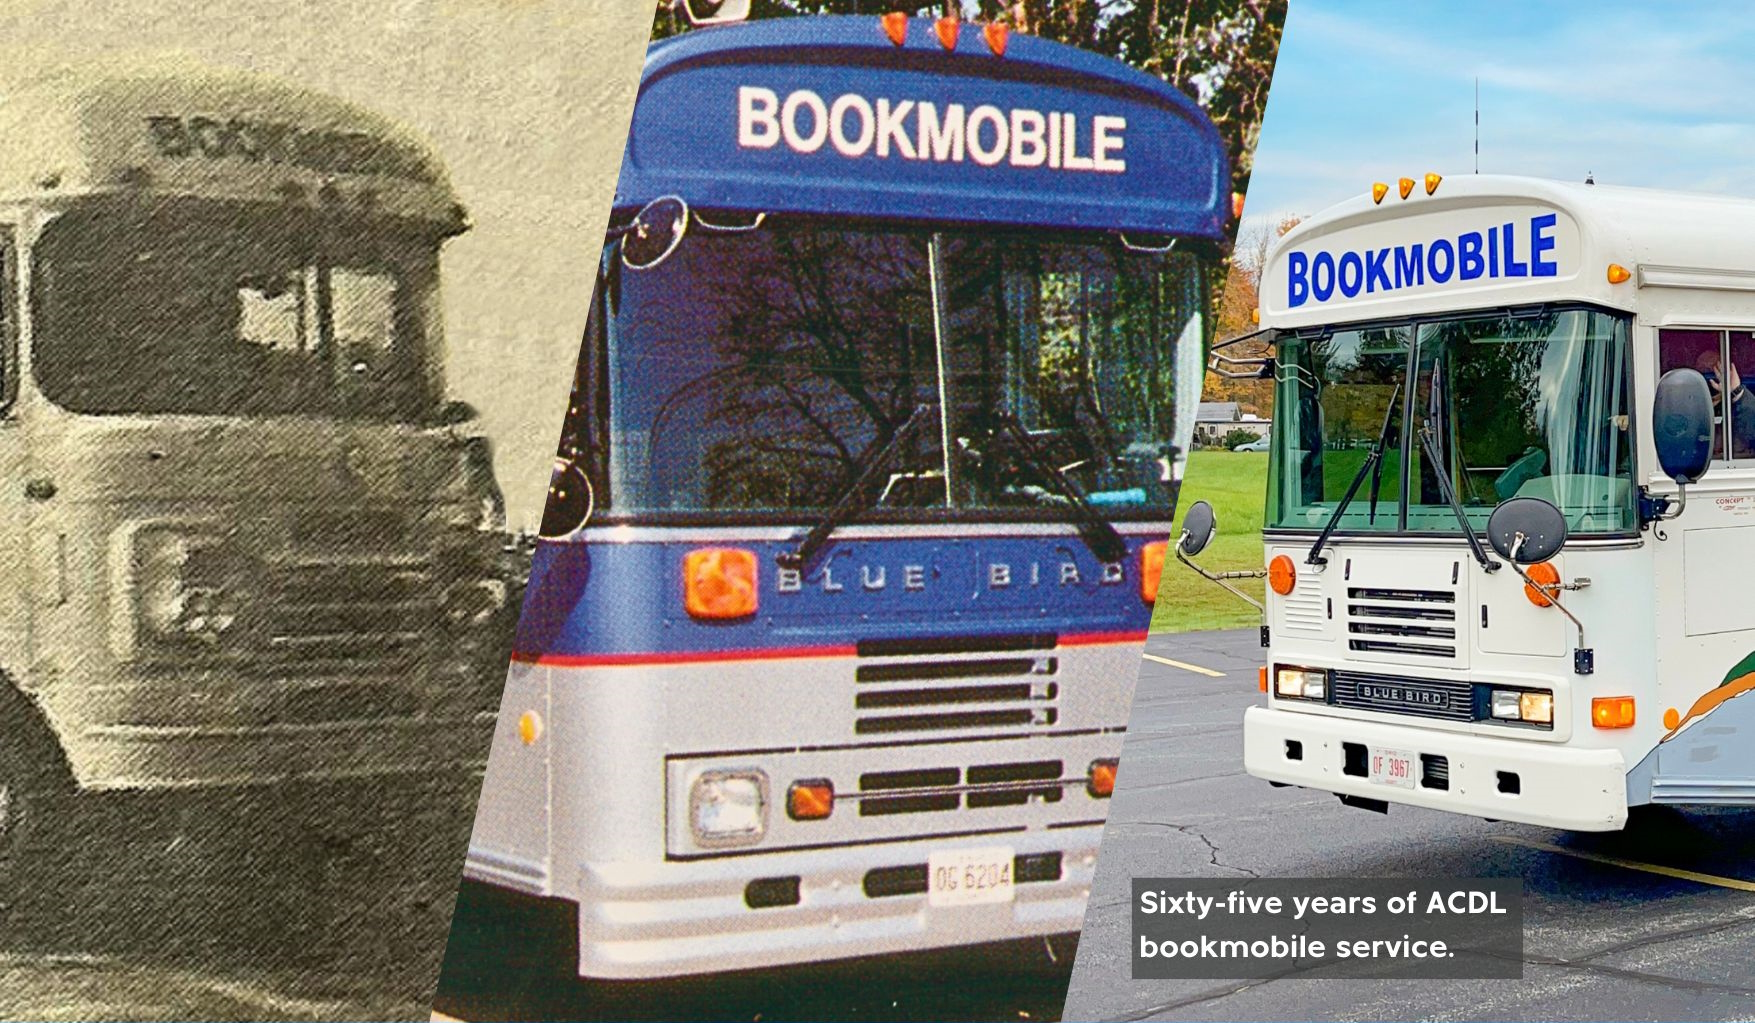 Images of three iterations of the County Bookmobile over sixty-five years.